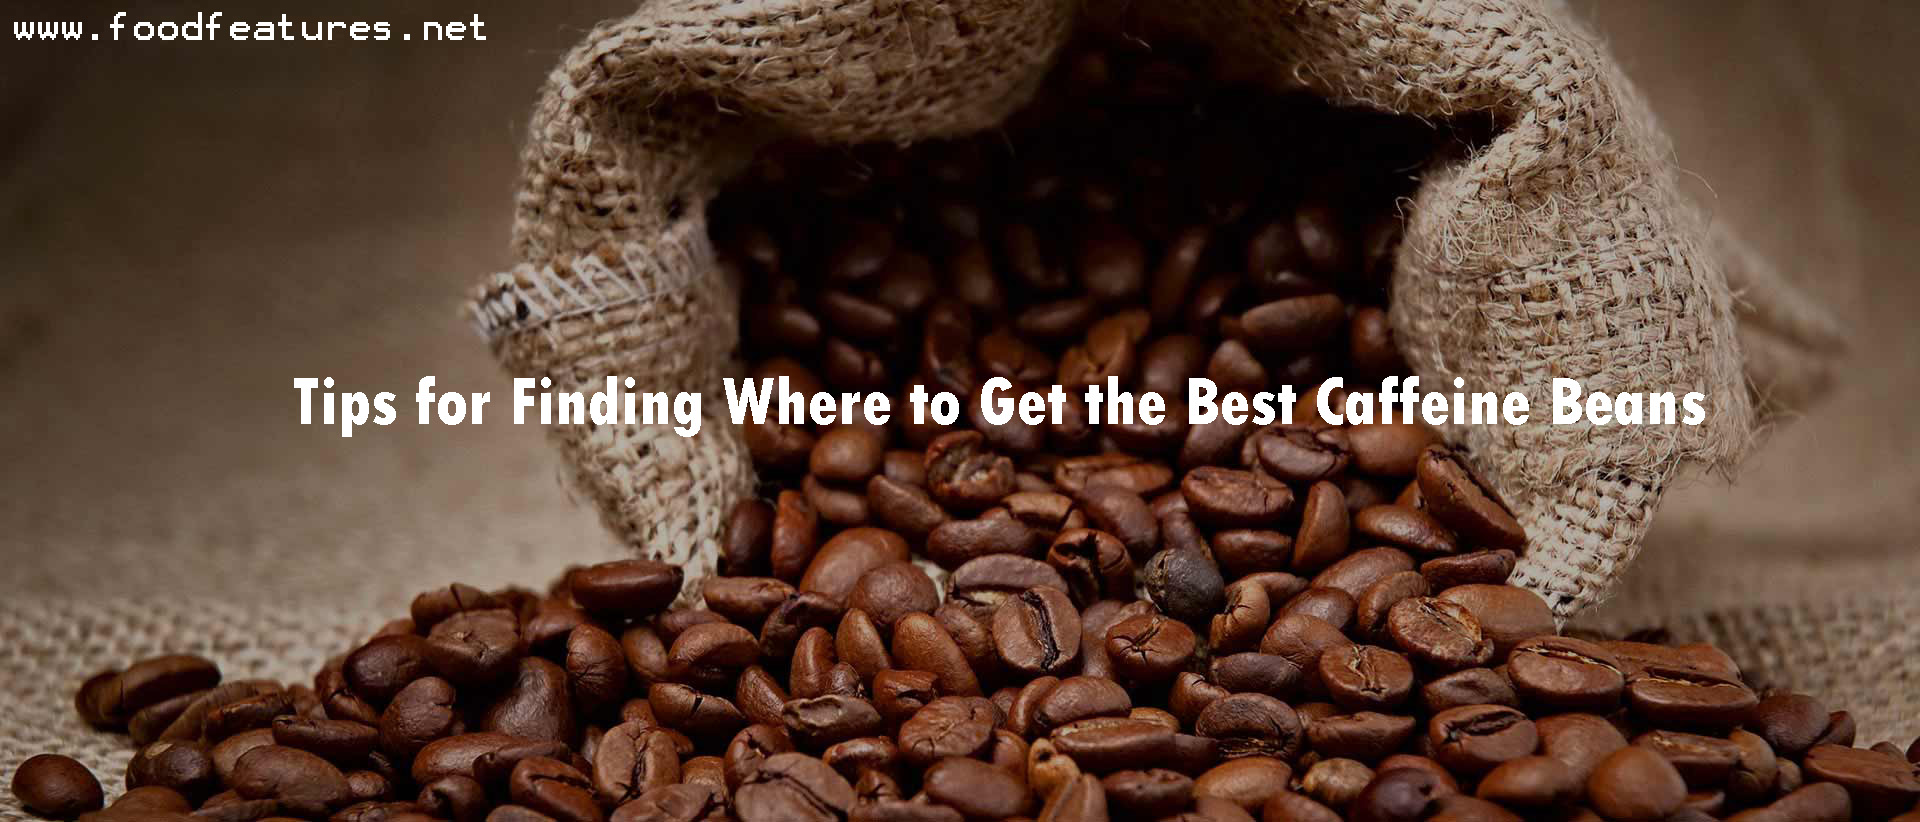 Tips for Finding Where to Get the Best Caffeine Beans